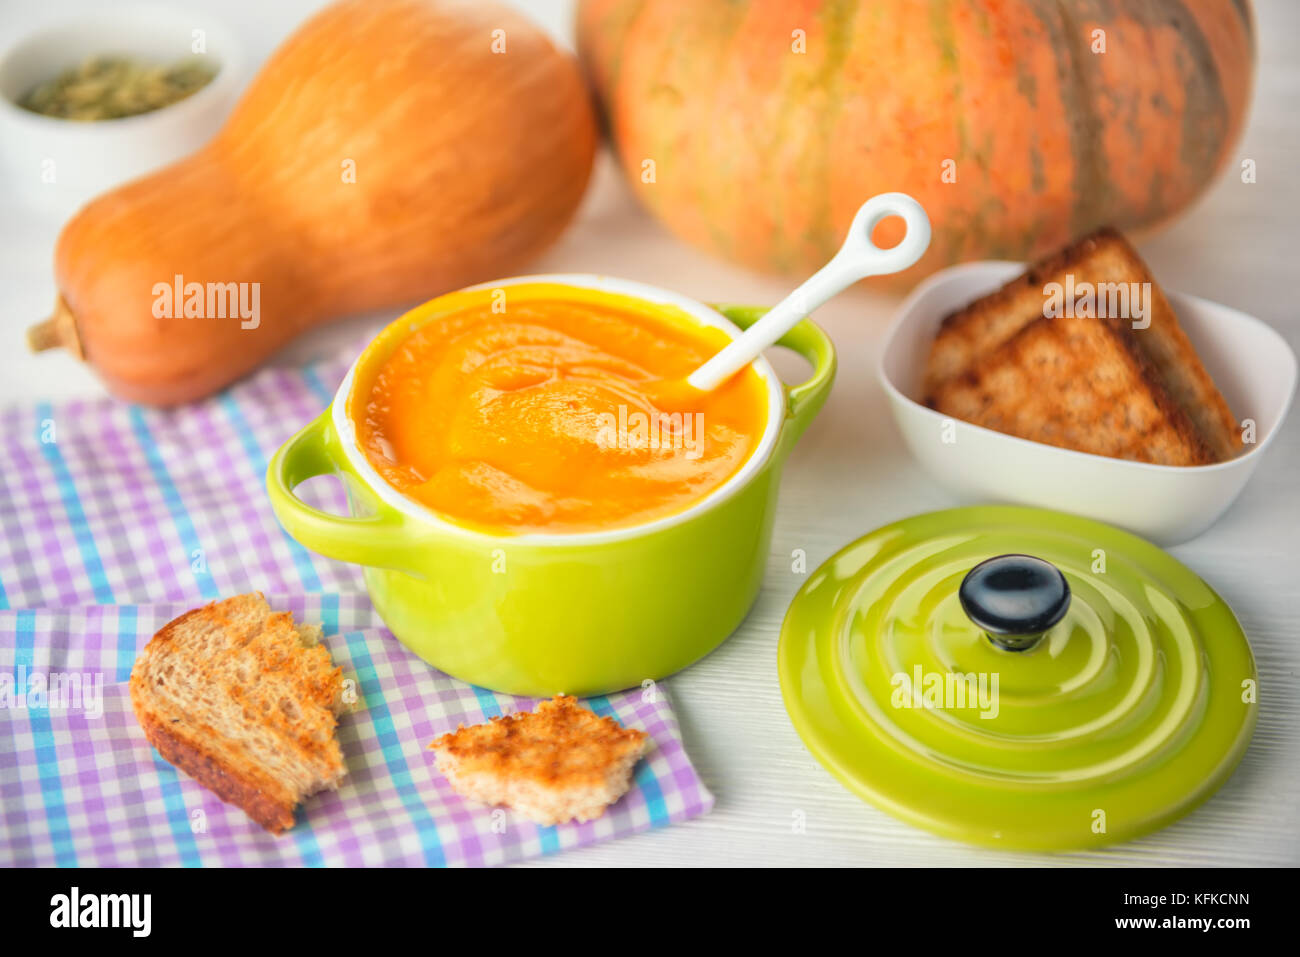 creamy pumpkin soup and bread in green bowl on napkin, concept of healthy eating Stock Photo